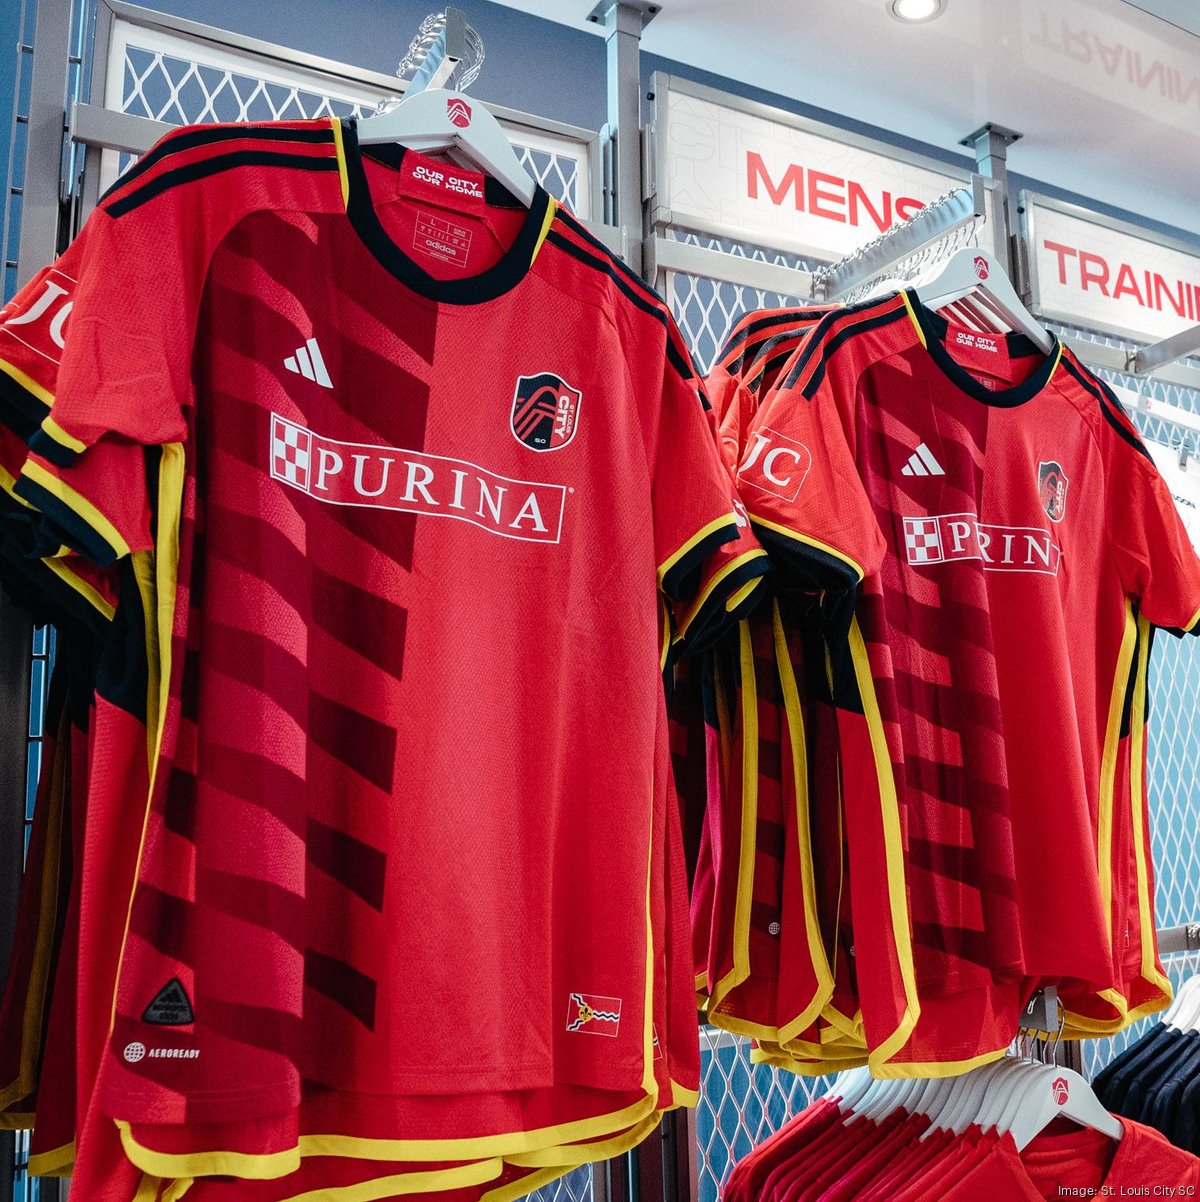 St. Louis City SC ranks among top MLS clubs for merchandise, jersey sales -  St. Louis Business Journal